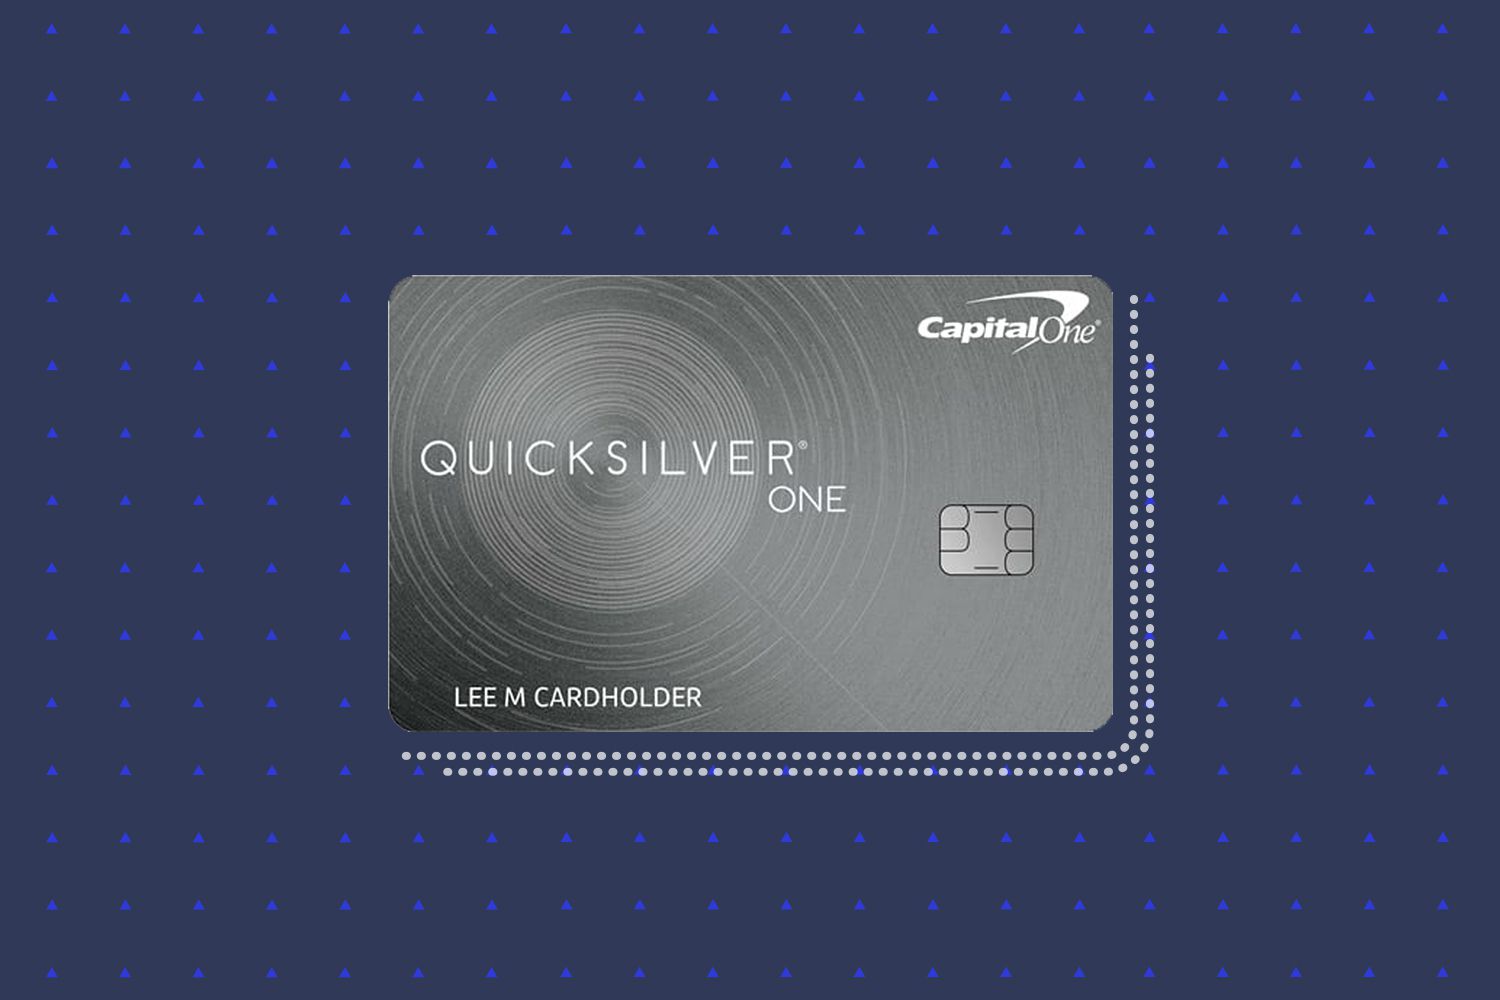 What Is The Credit Limit For Capital One Quicksilver